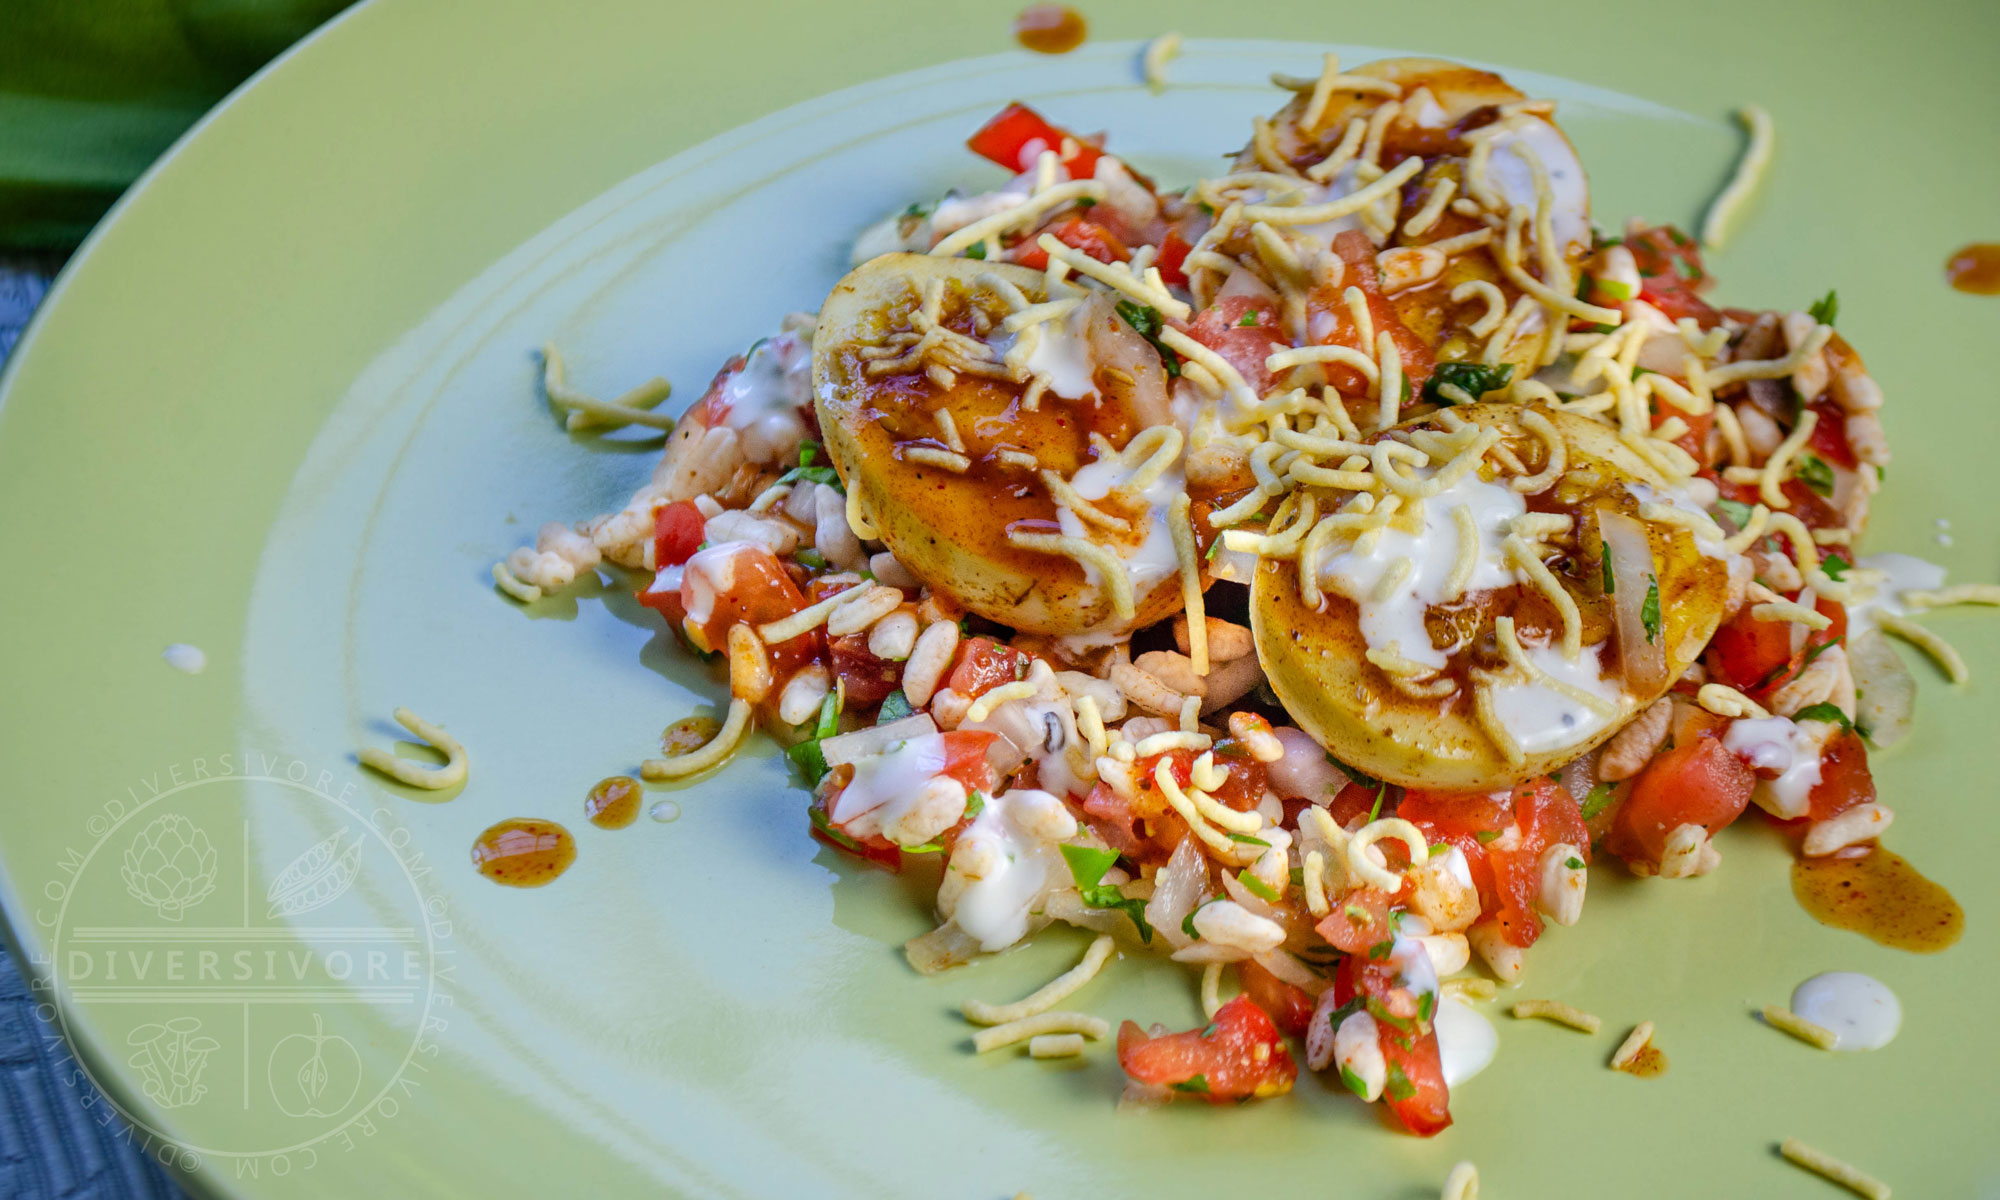 Featured image for “Egg Chaat”